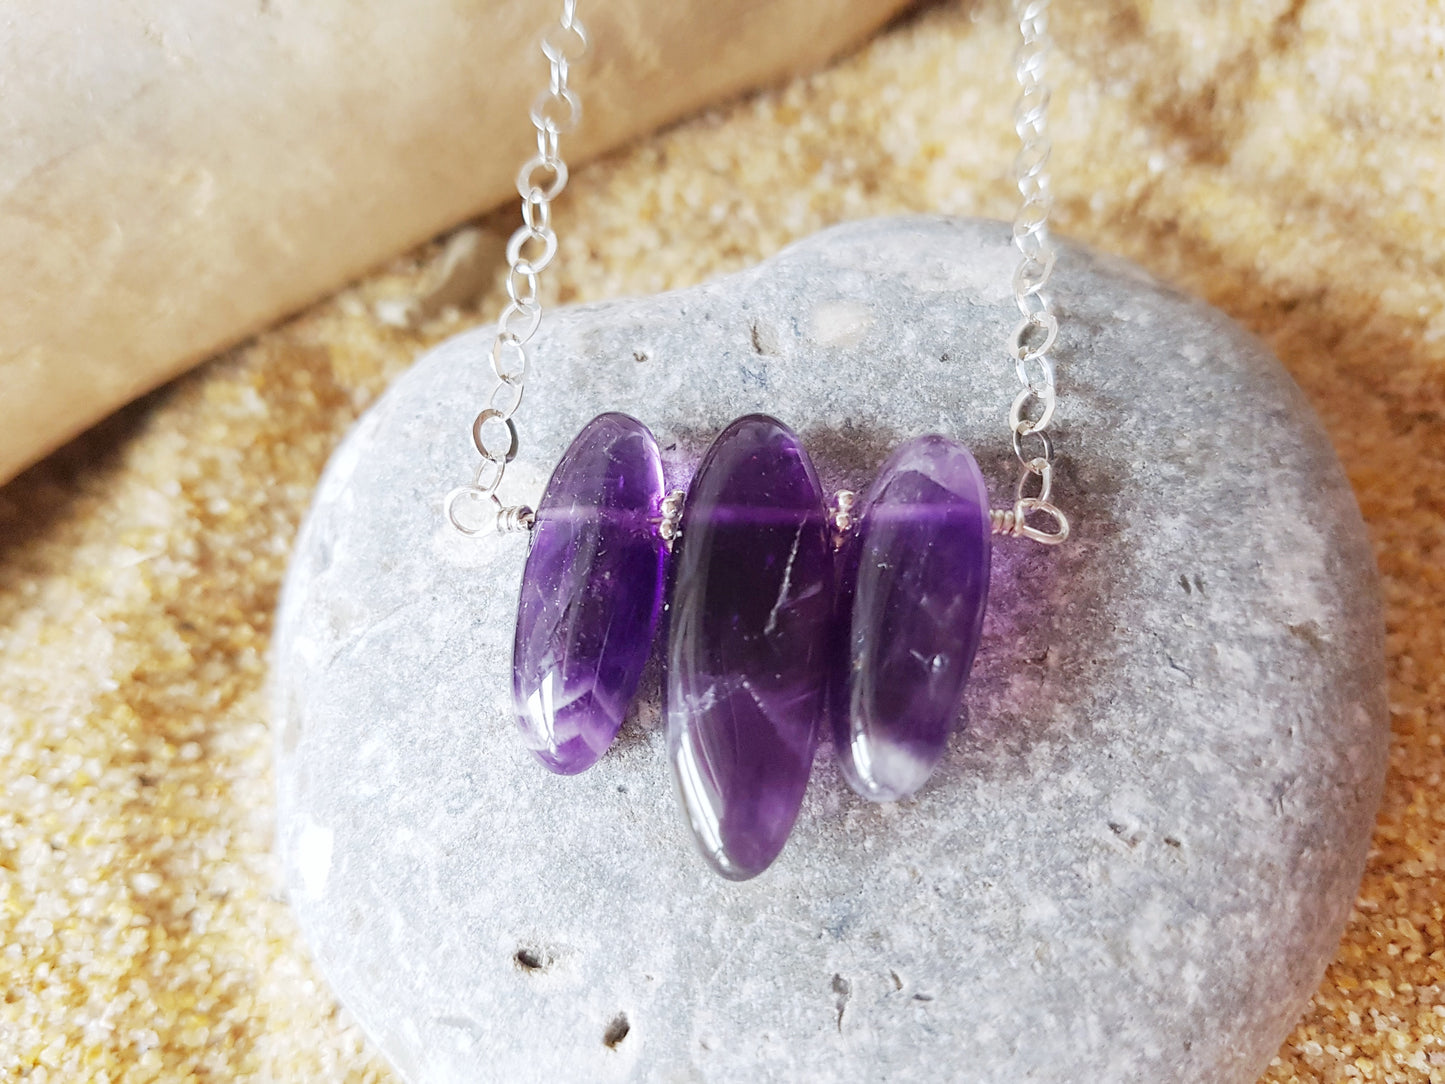 Amethyst Today, Tomorrow & Forever Necklace. OOAK Necklace made with Three long genuine Amethyst stones on Sterling Silver wire and chain. 